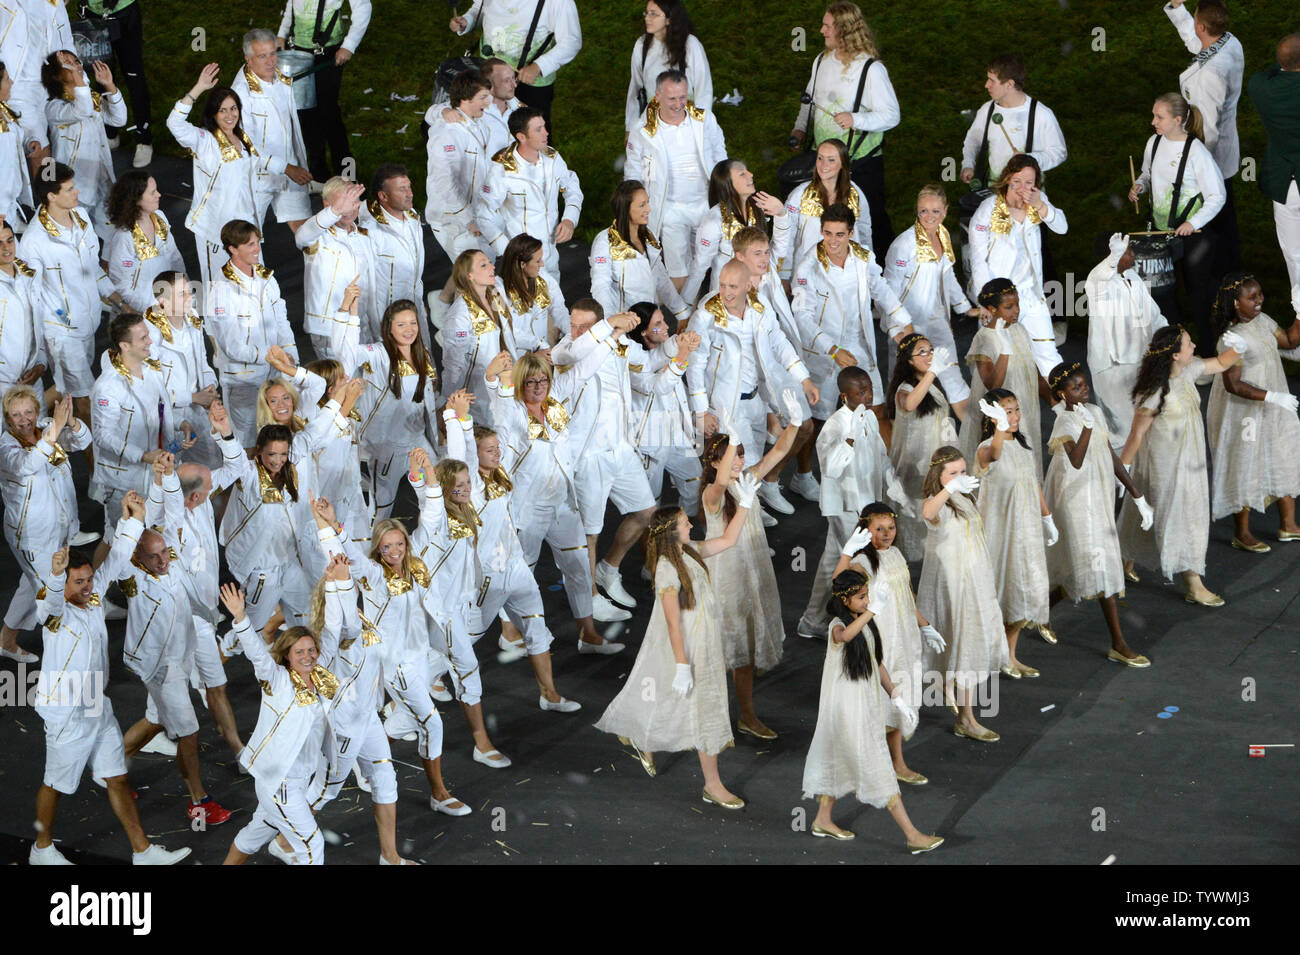 Team Great Britain enters in the Parade of Nations during the Opening Ceremony of the London 2012 Summer Olympics on July 27, 2012 in Stafford, London. UPI/Pat Benic Stock Photo